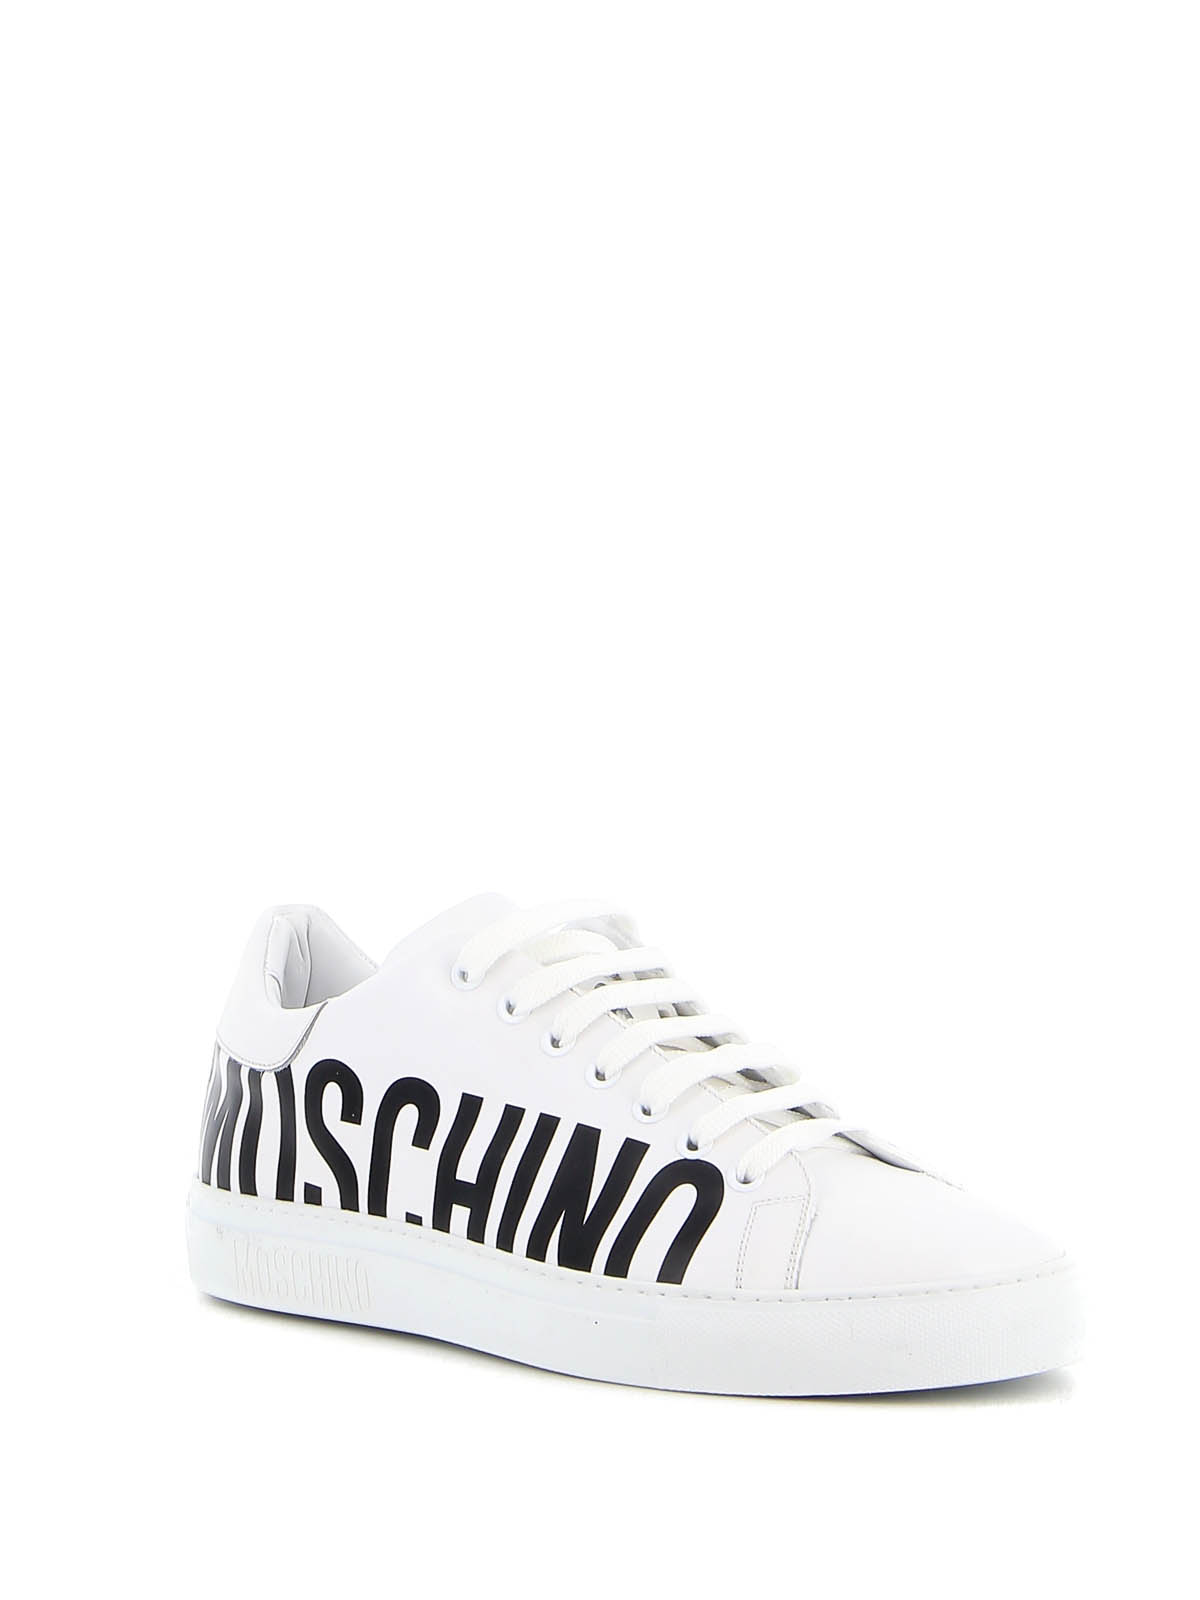 Trainers Moschino - Moschino print leather sneakers - MB15012G0DGA0100